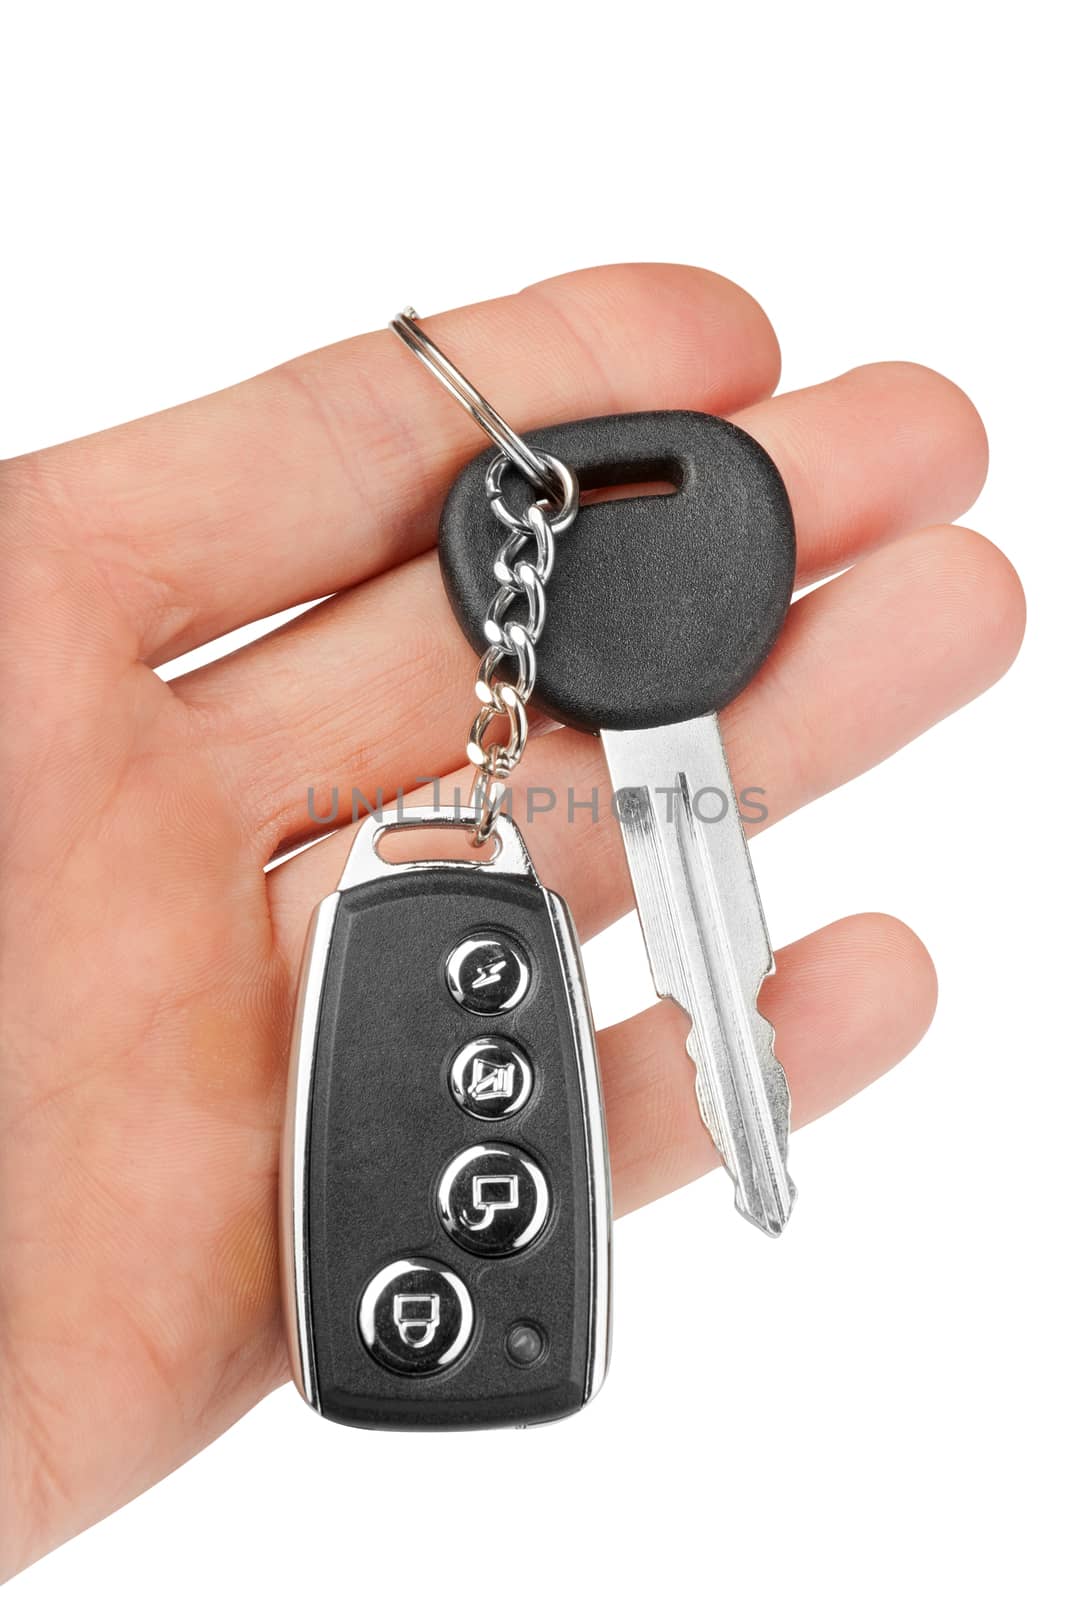 car key with alarm in hand isolated